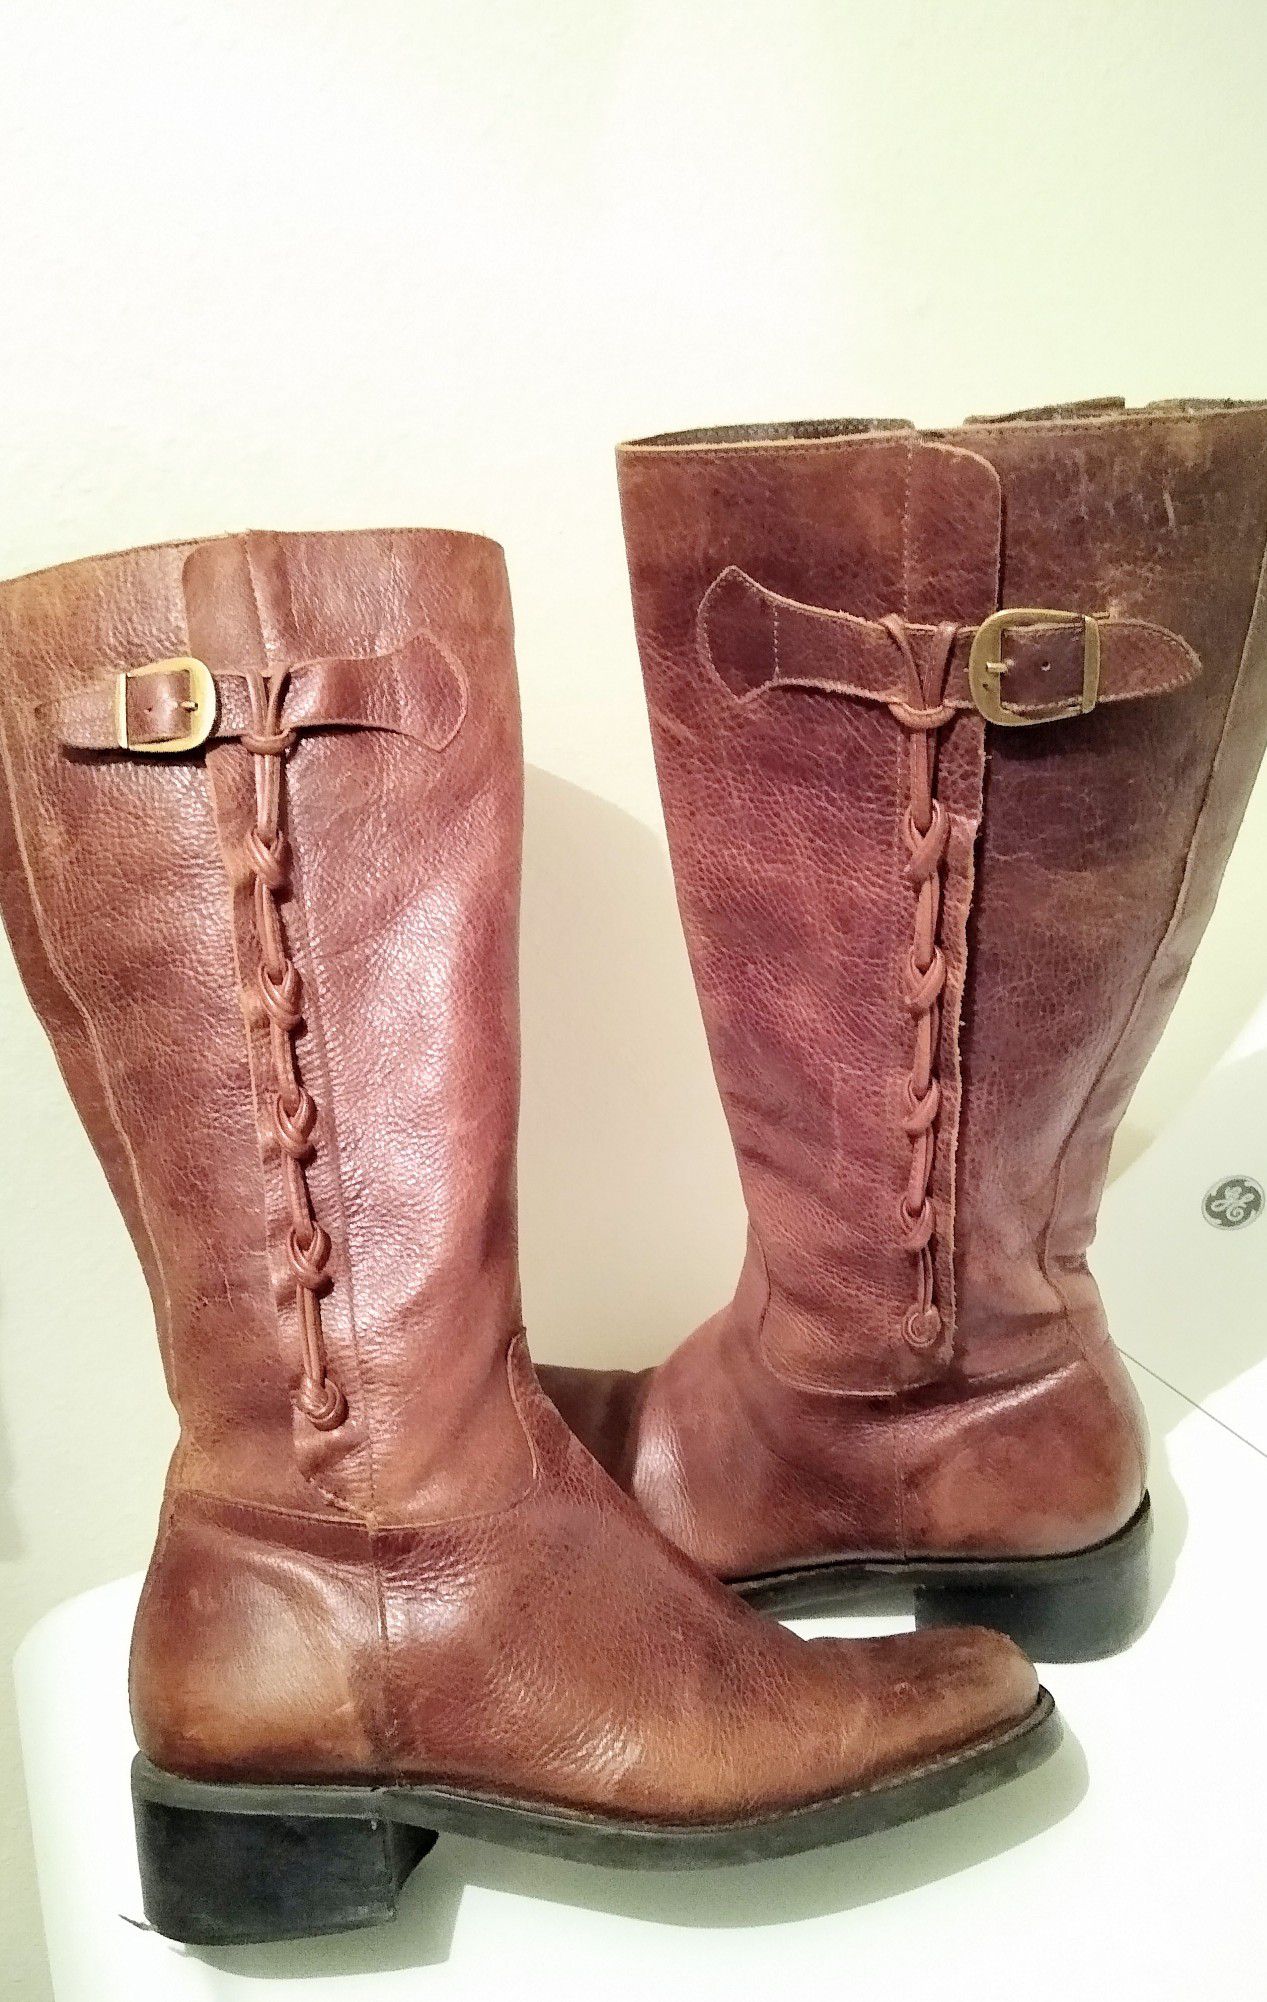 Riding leather women's boots size 7.5